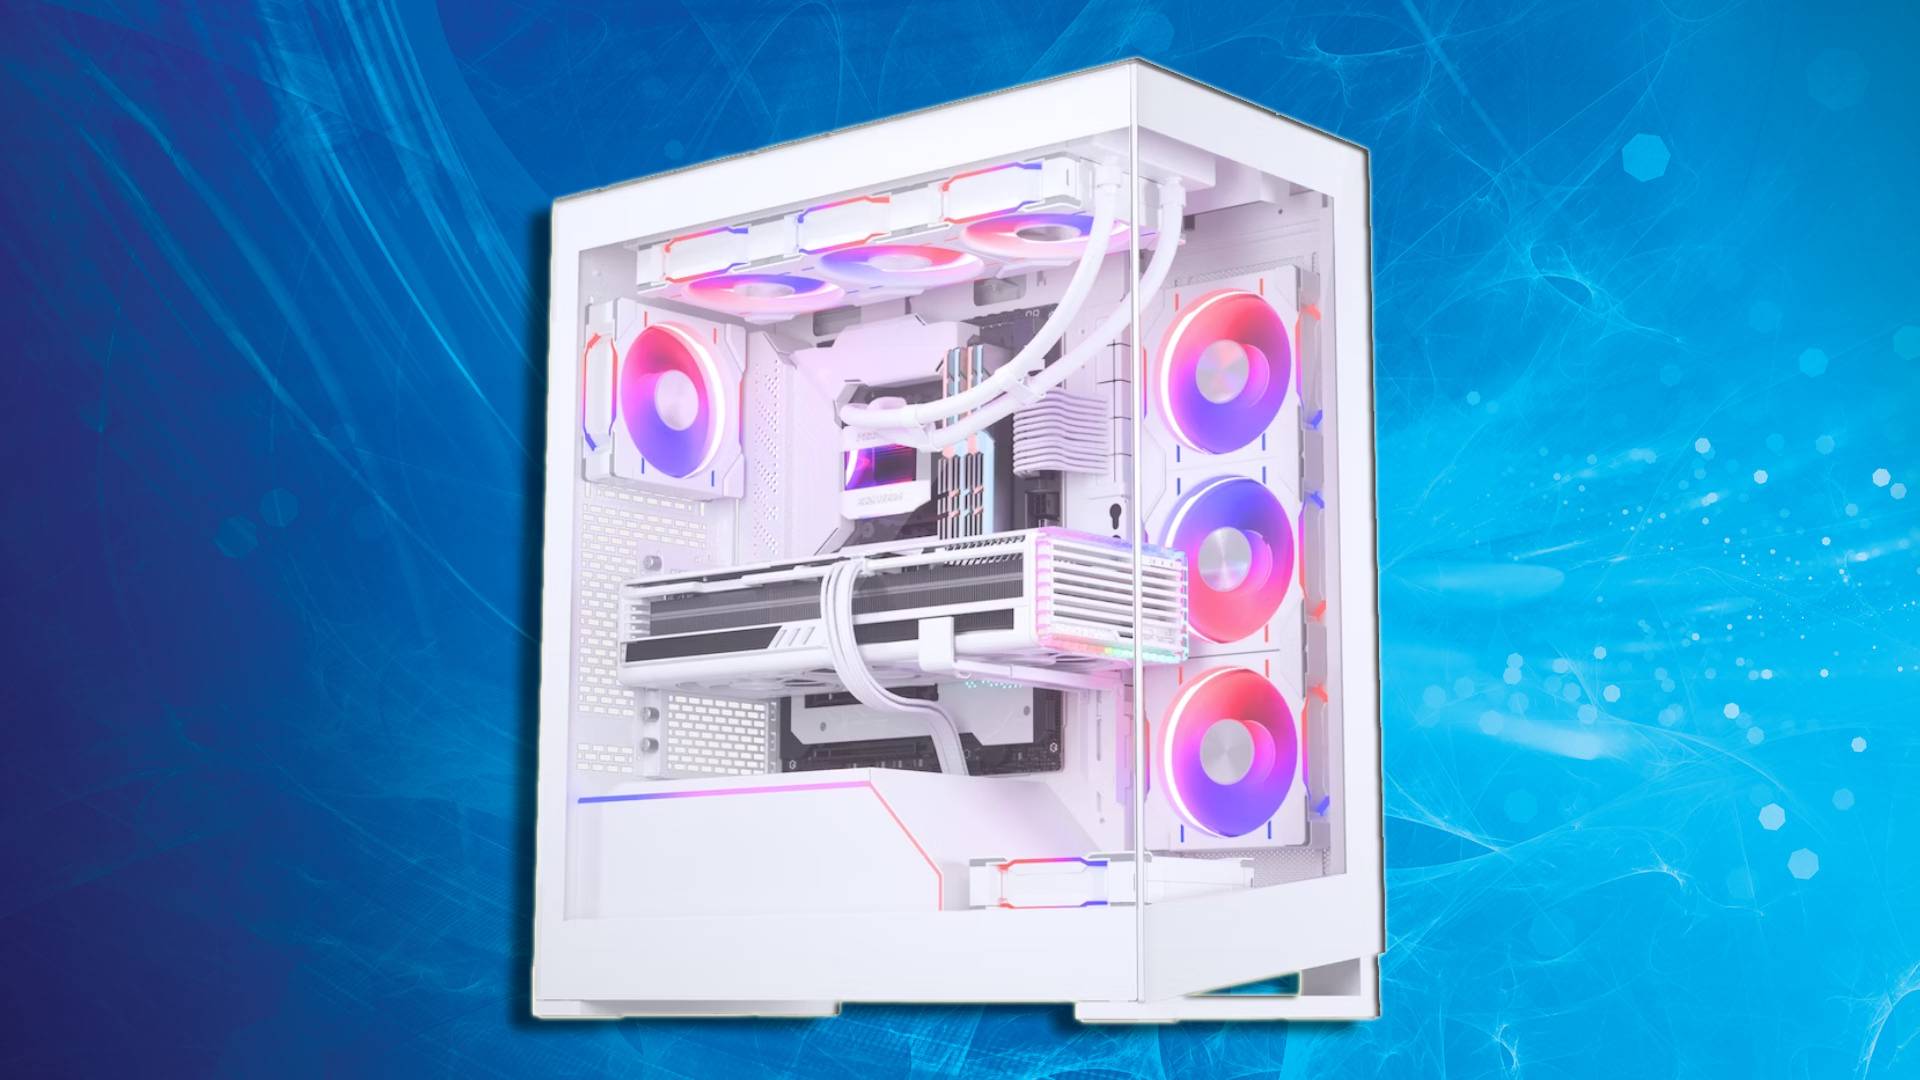 Phanteks NV5 case: a white PC case with RGB components appears against a blue background.